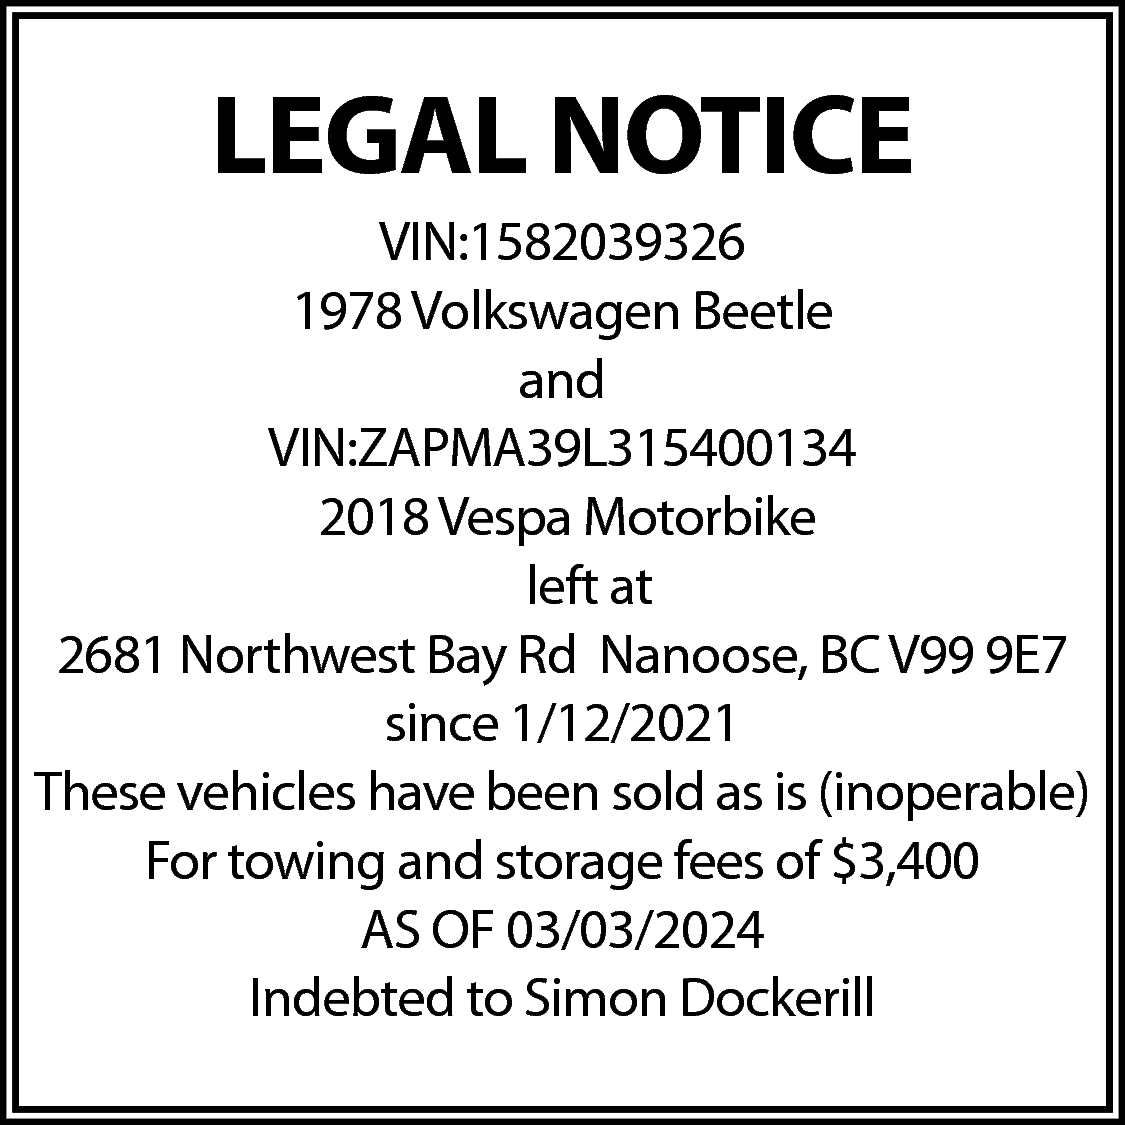 LEGAL NOTICE <br>VIN:1582039326 <br>1978 Volkswagen  LEGAL NOTICE  VIN:1582039326  1978 Volkswagen Beetle  and  VIN:ZAPMA39L315400134  2018 Vespa Motorbike  left at  2681 Northwest Bay Rd Nanoose, BC V99 9E7  since 1/12/2021  These vehicles have been sold as is (inoperable)  For towing and storage fees of $3,400  AS OF 03/03/2024  Indebted to Simon Dockerill    